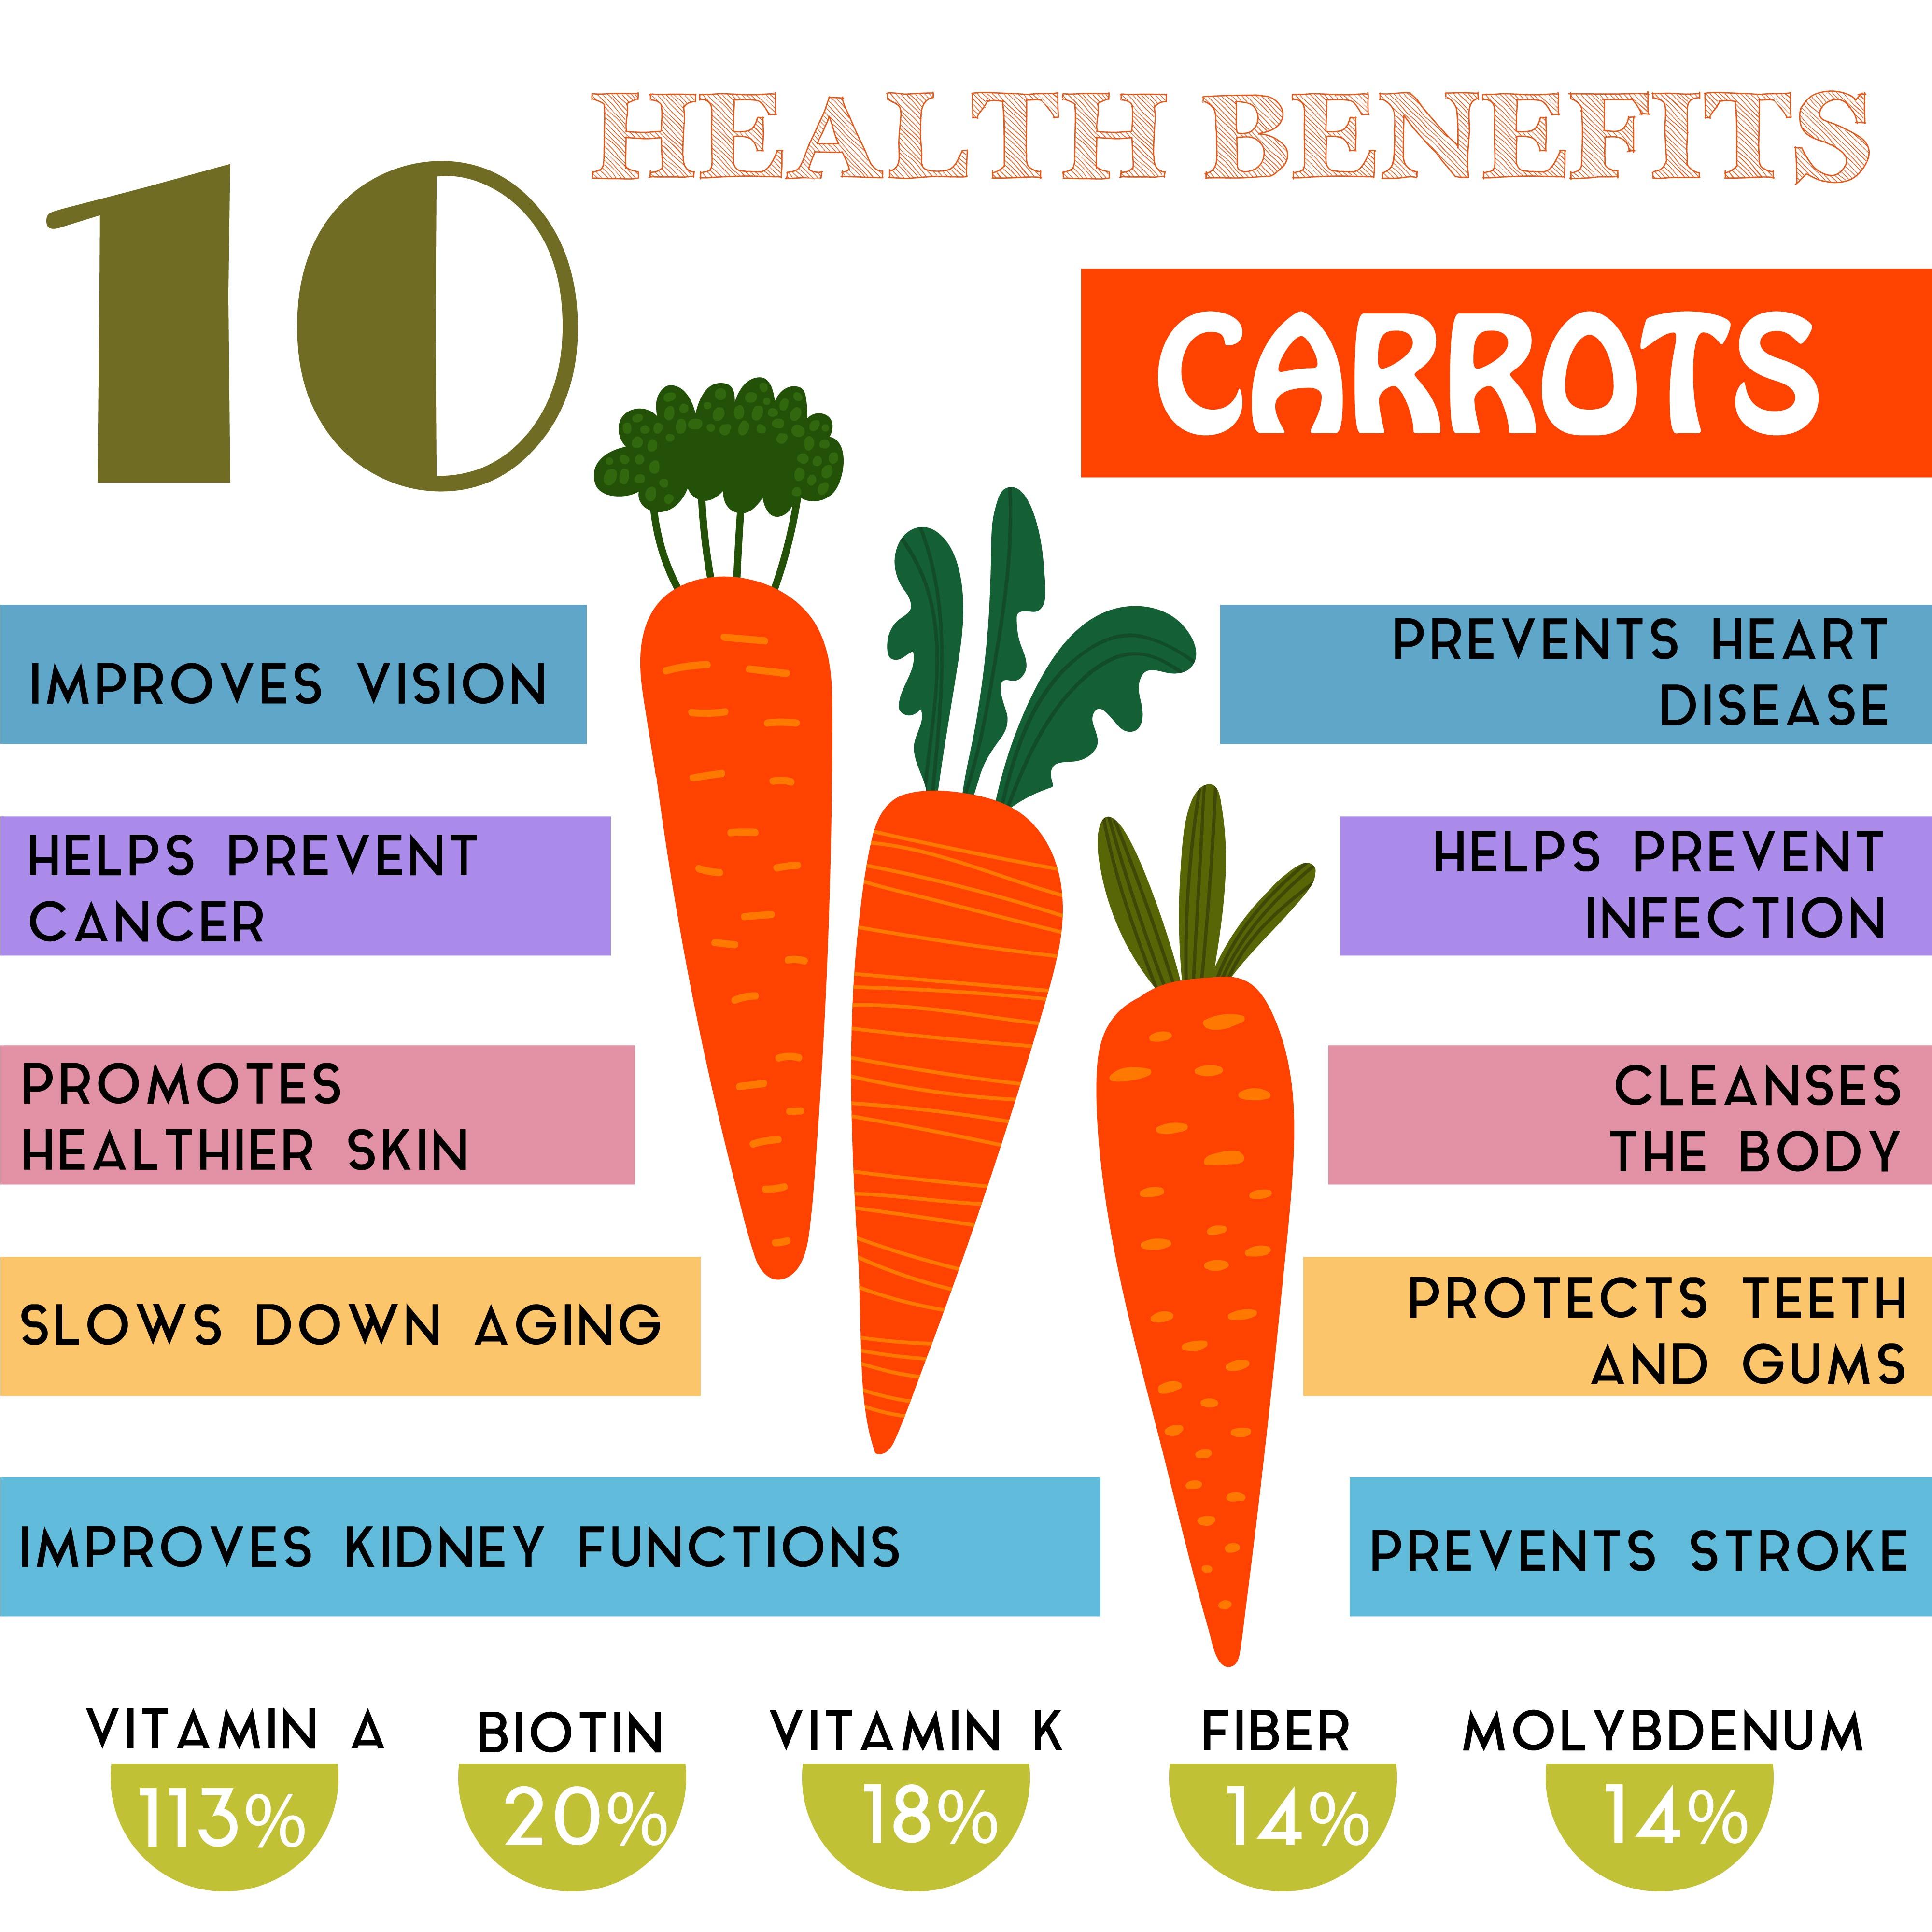 Most important health benefits of carrots